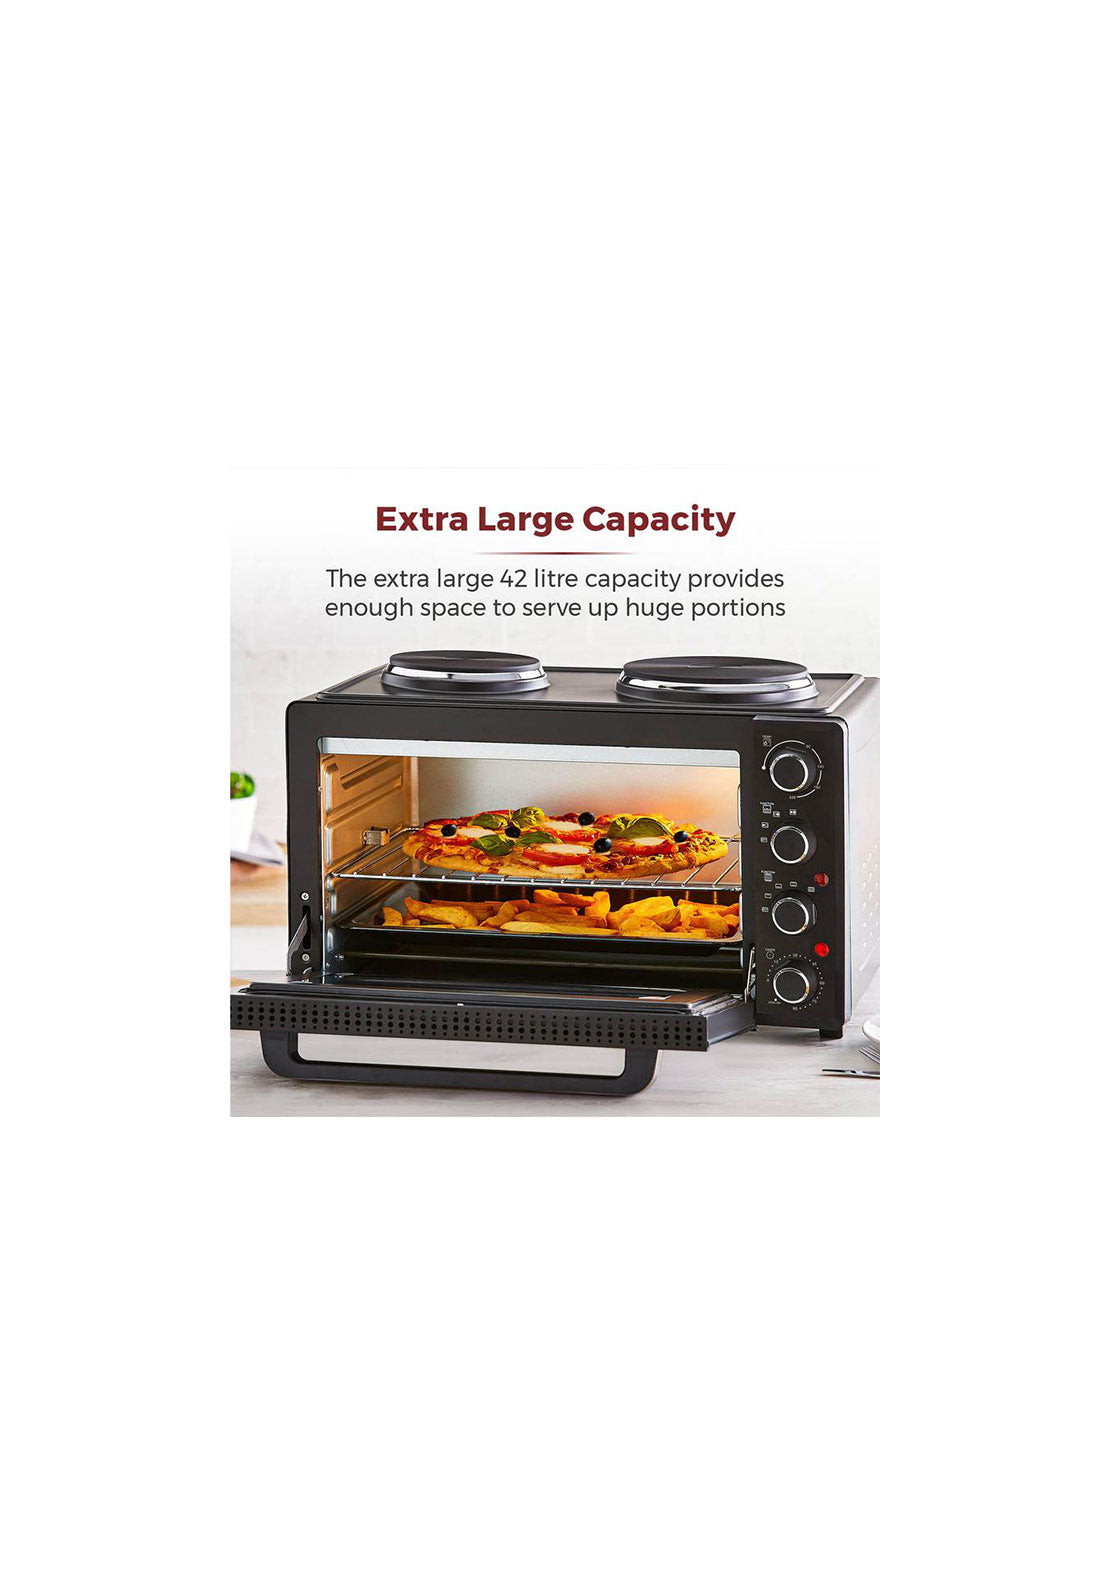 Tower 42L Mini Oven With Hot Plates | T14045 9 Shaws Department Stores